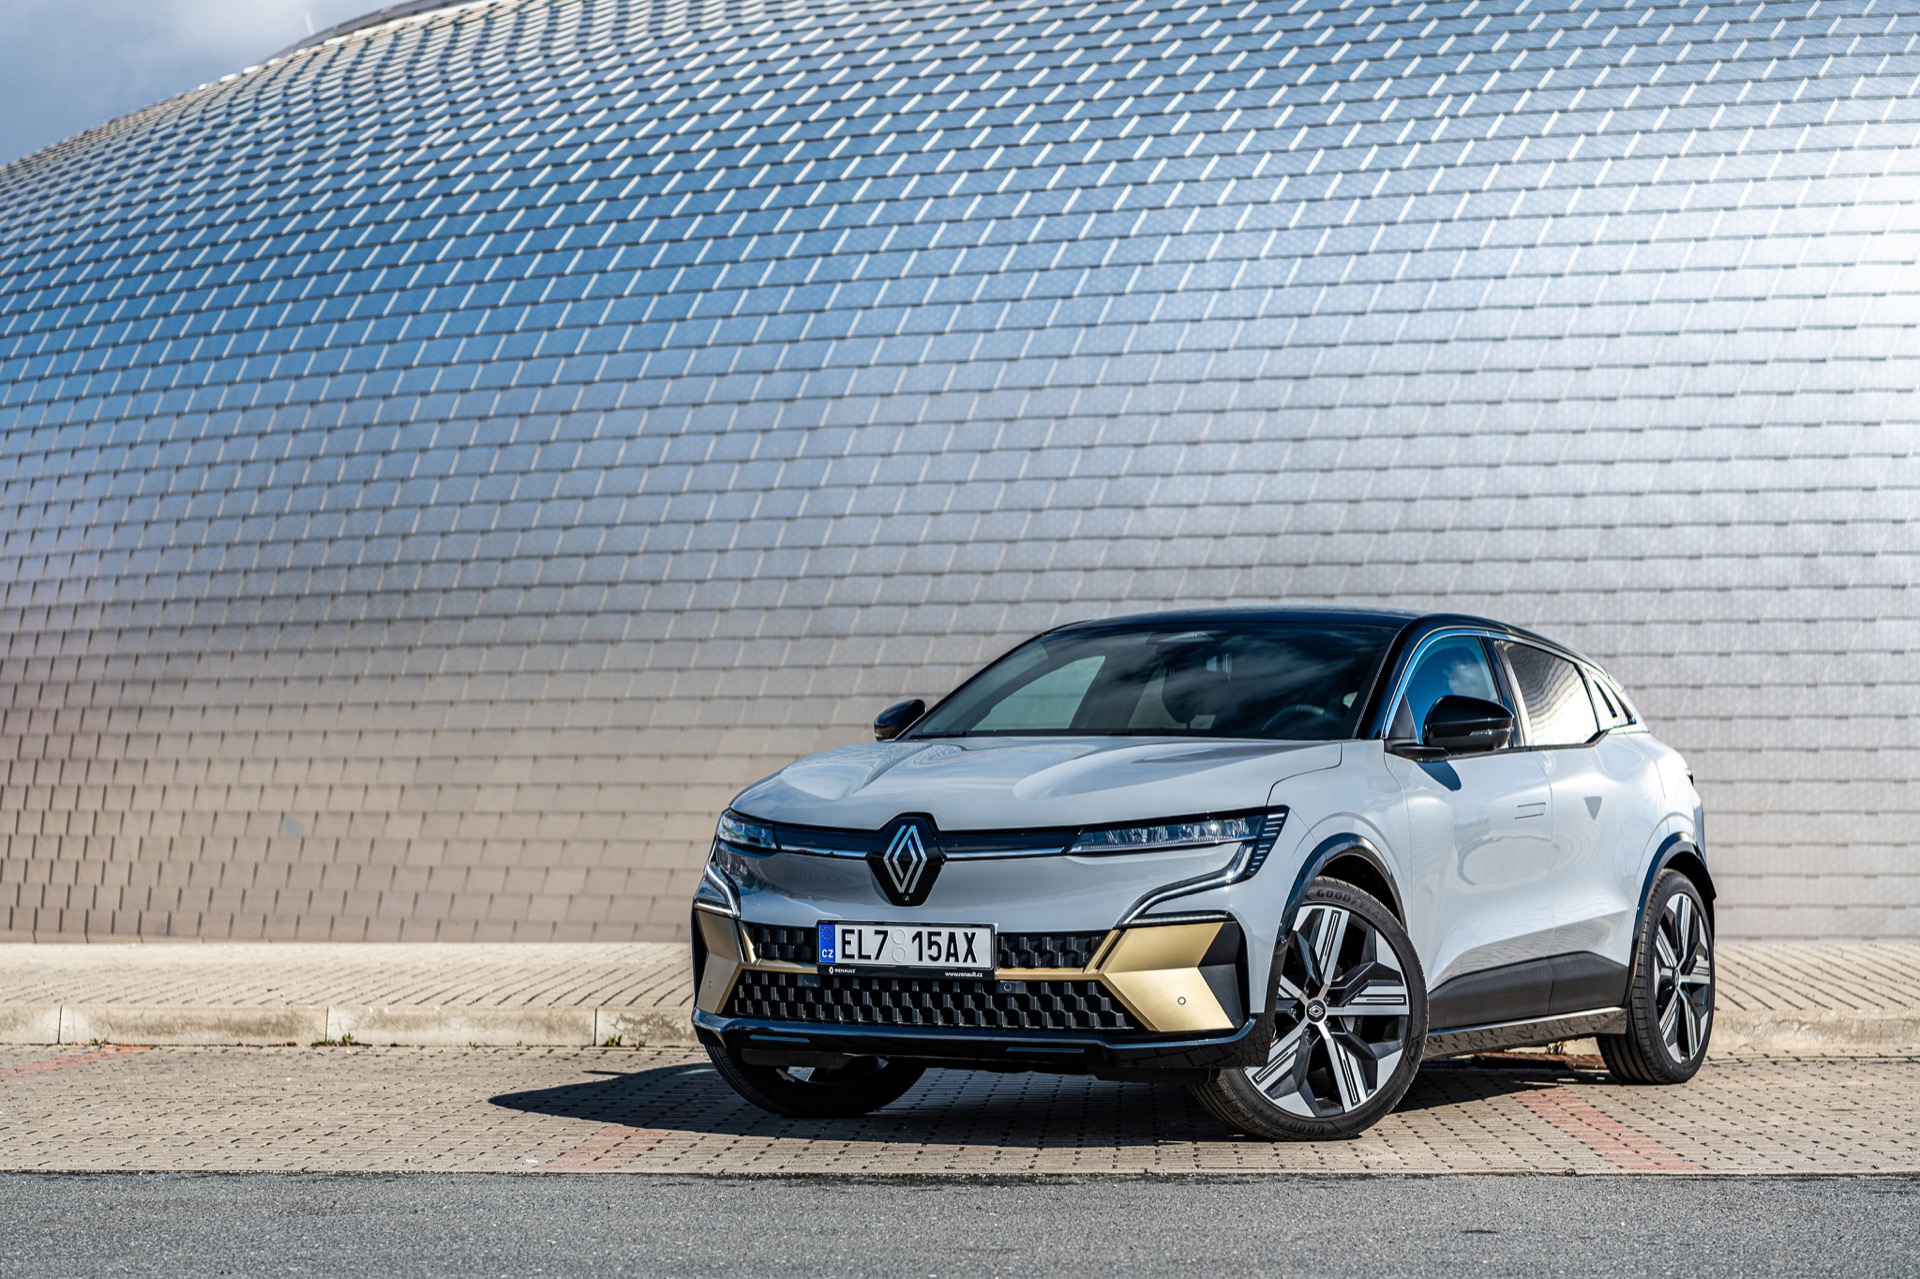 Renault Megane E-Tech 100% elettrica: candidata n. 12 per il Reader’s Car of the Year 2022